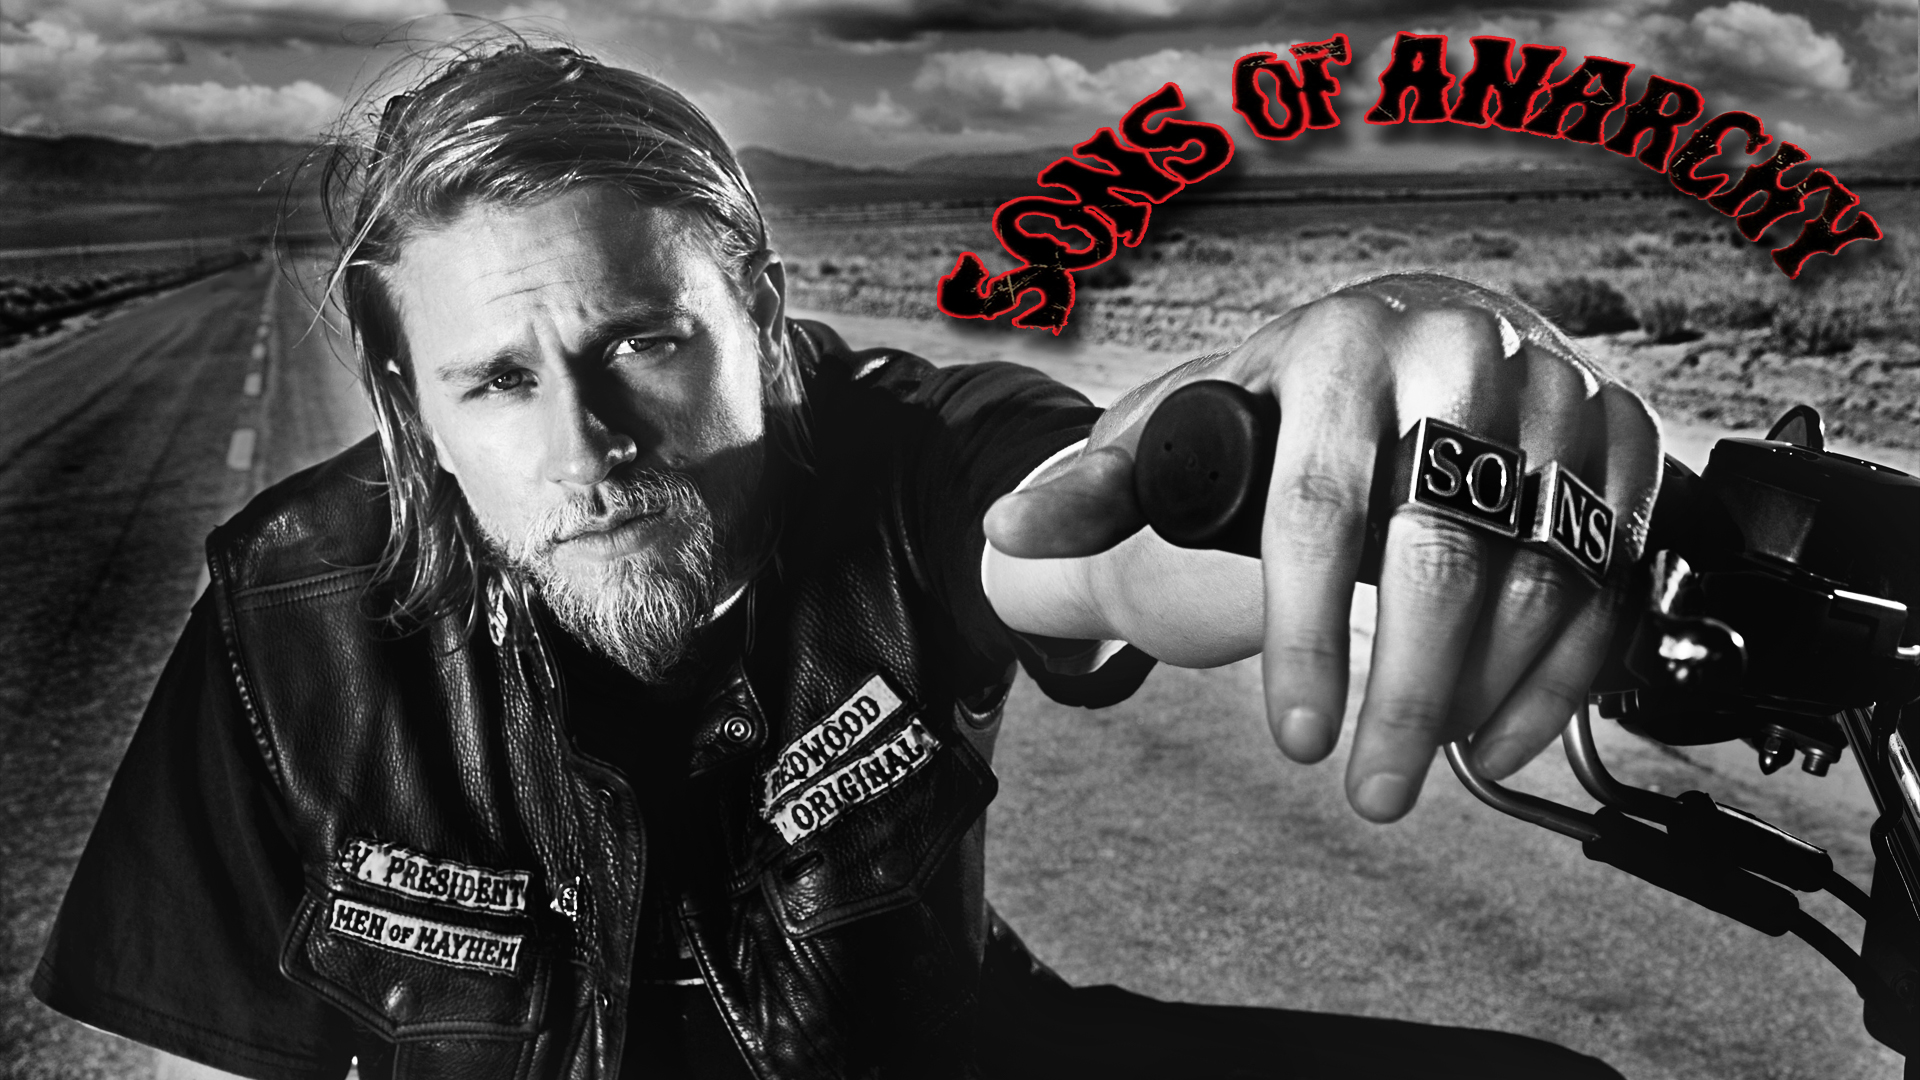 [76+] Sons Of Anarchy Wallpaper on WallpaperSafari